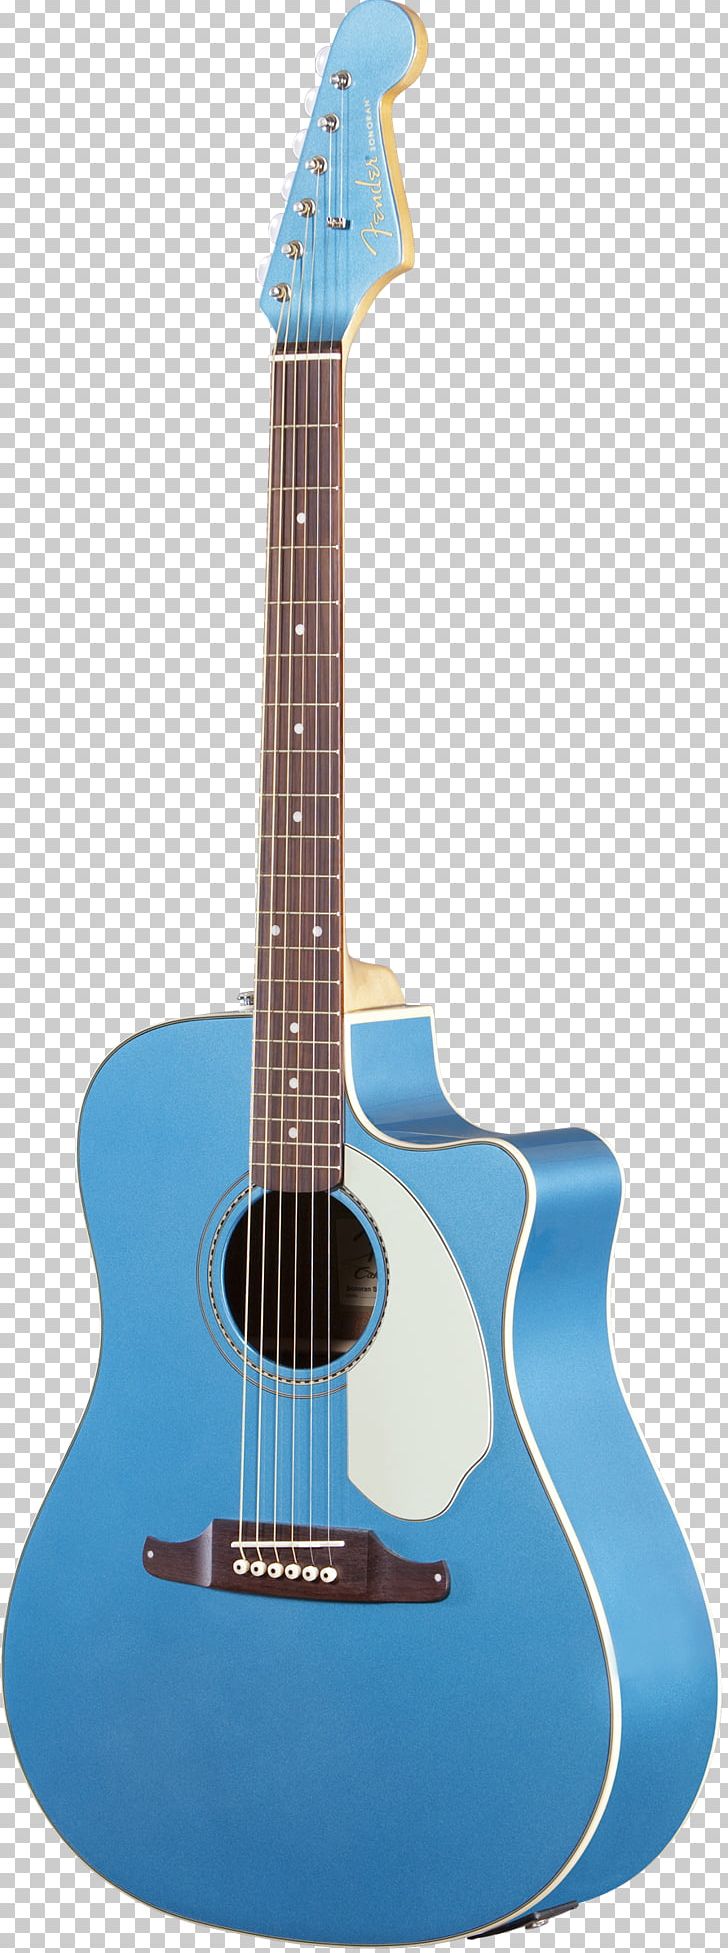 Acoustic Guitar Acoustic-electric Guitar Bass Guitar Fender Sonoran SCE PNG, Clipart, Acoustic Electric Guitar, Cuatro, Guitar, Guitar Accessory, Music Free PNG Download